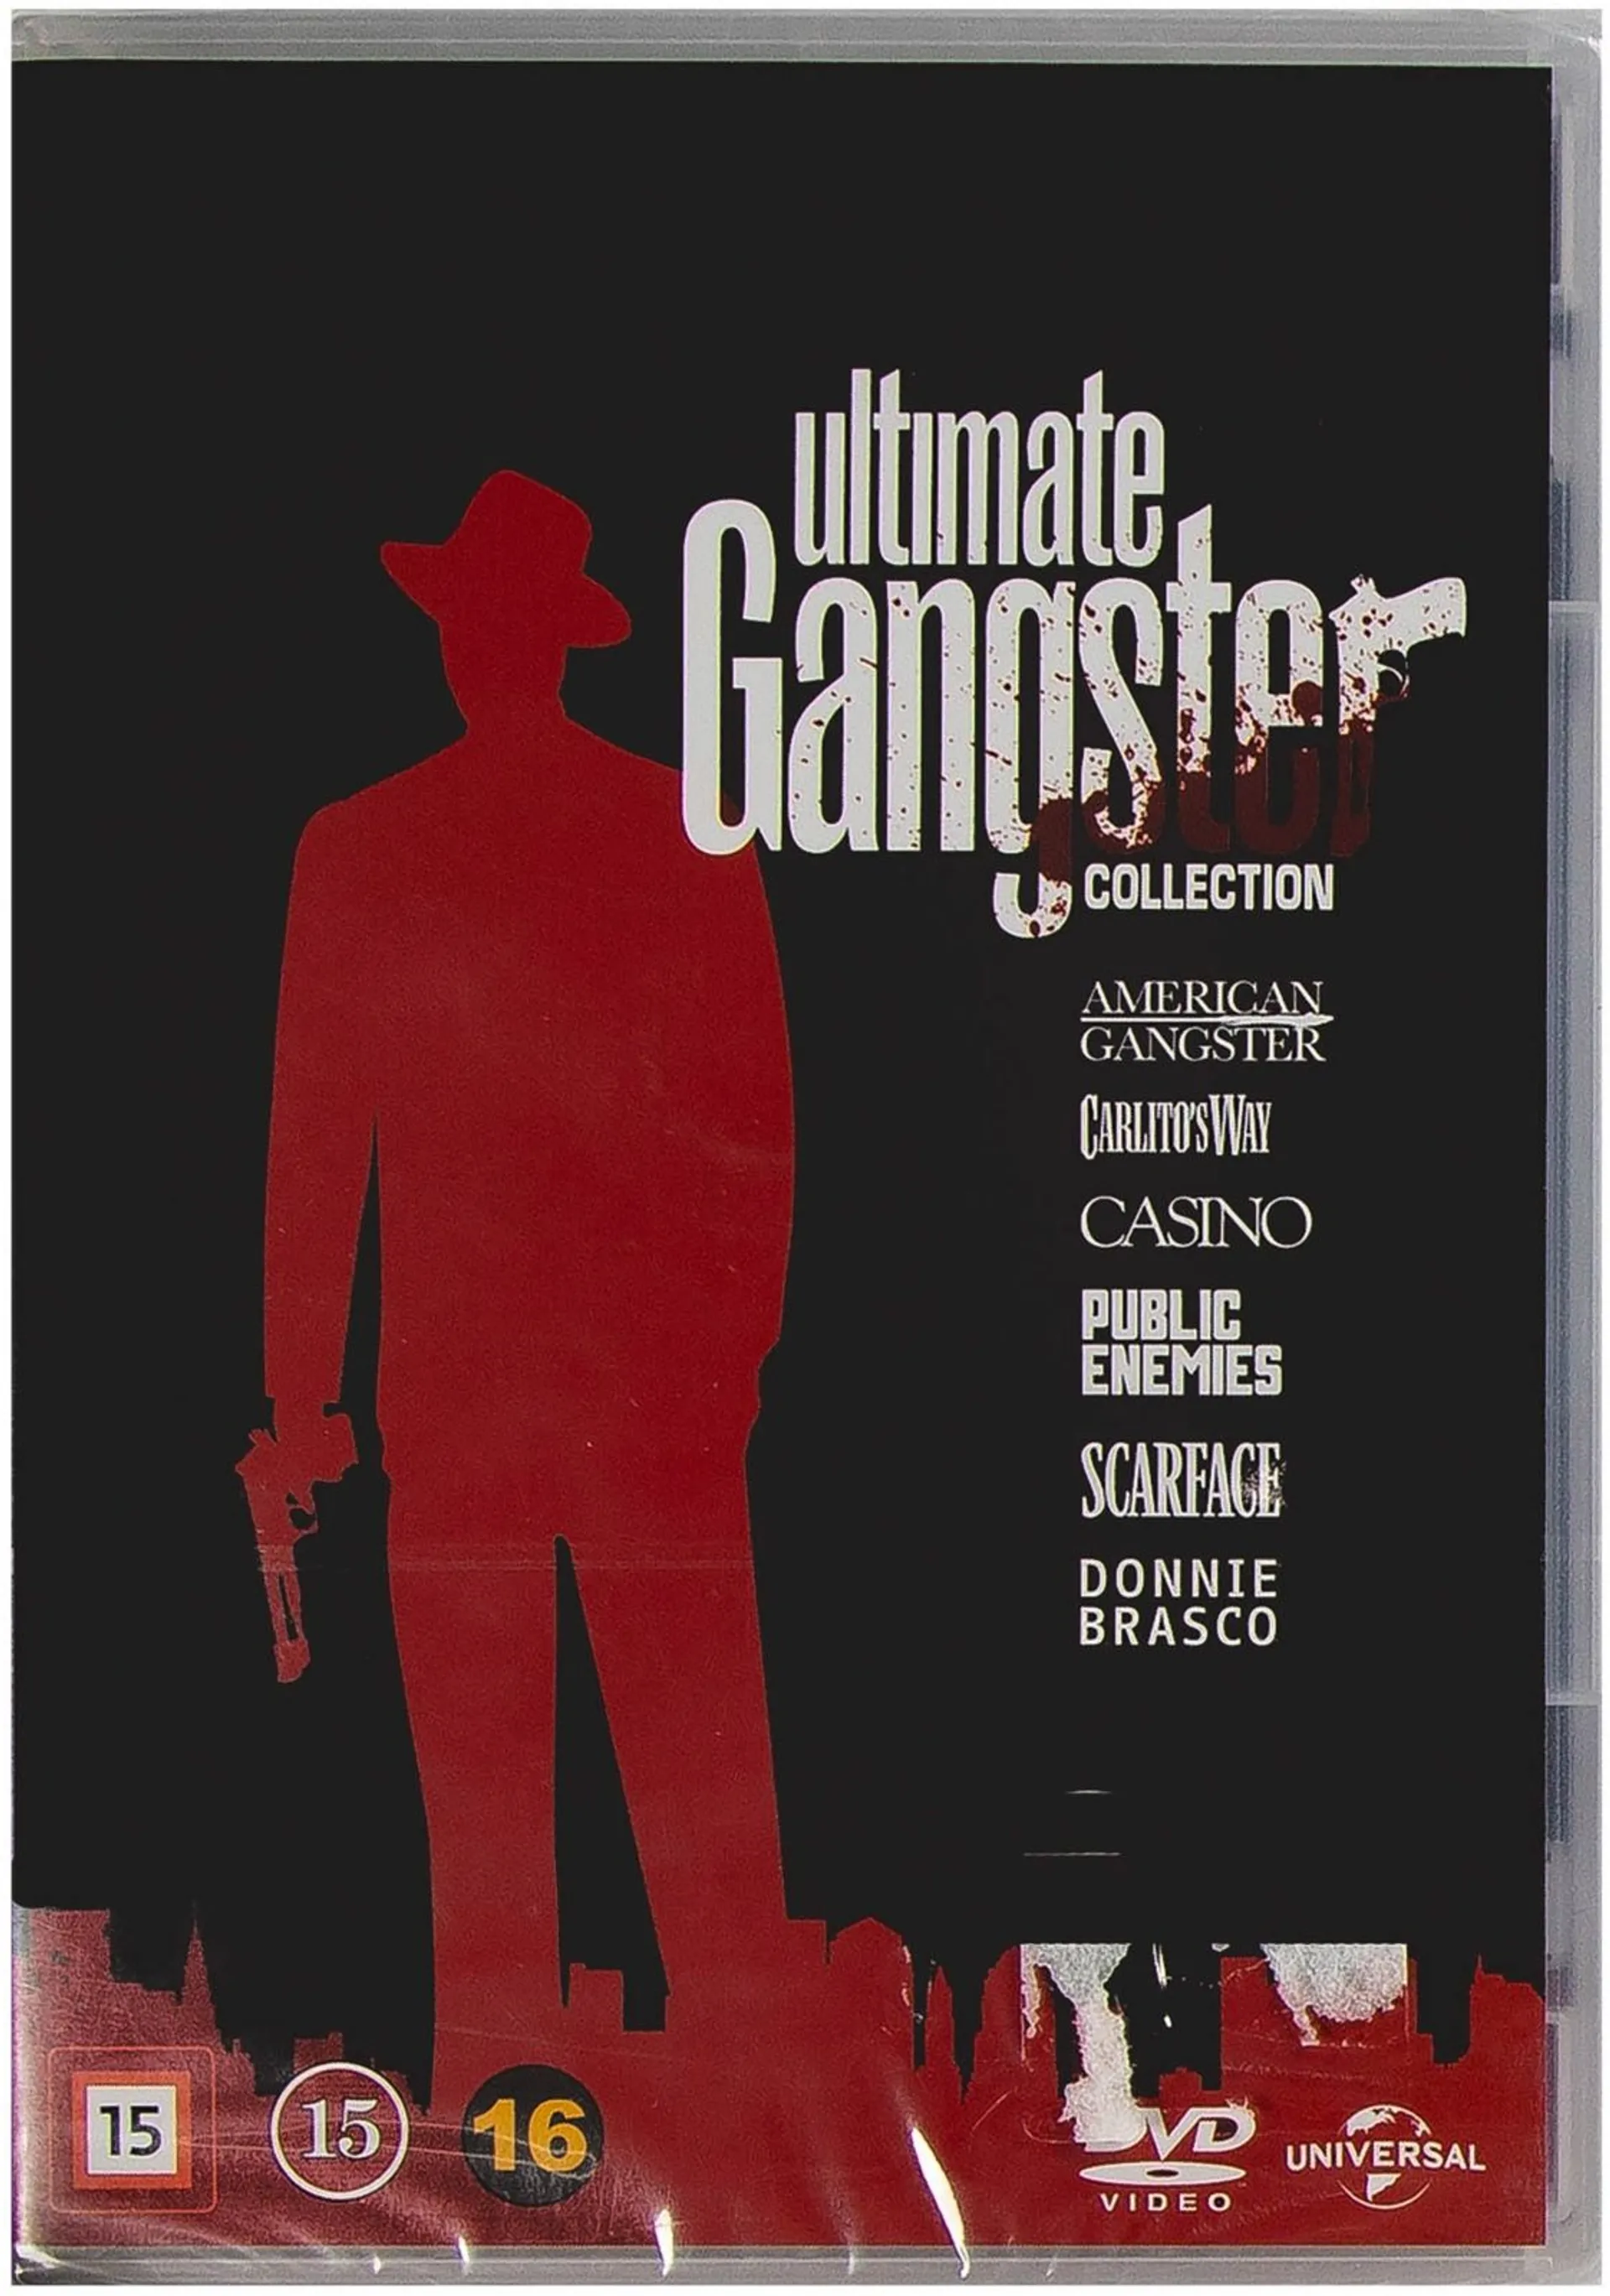 Uktimate Gangster Collection 6DVD